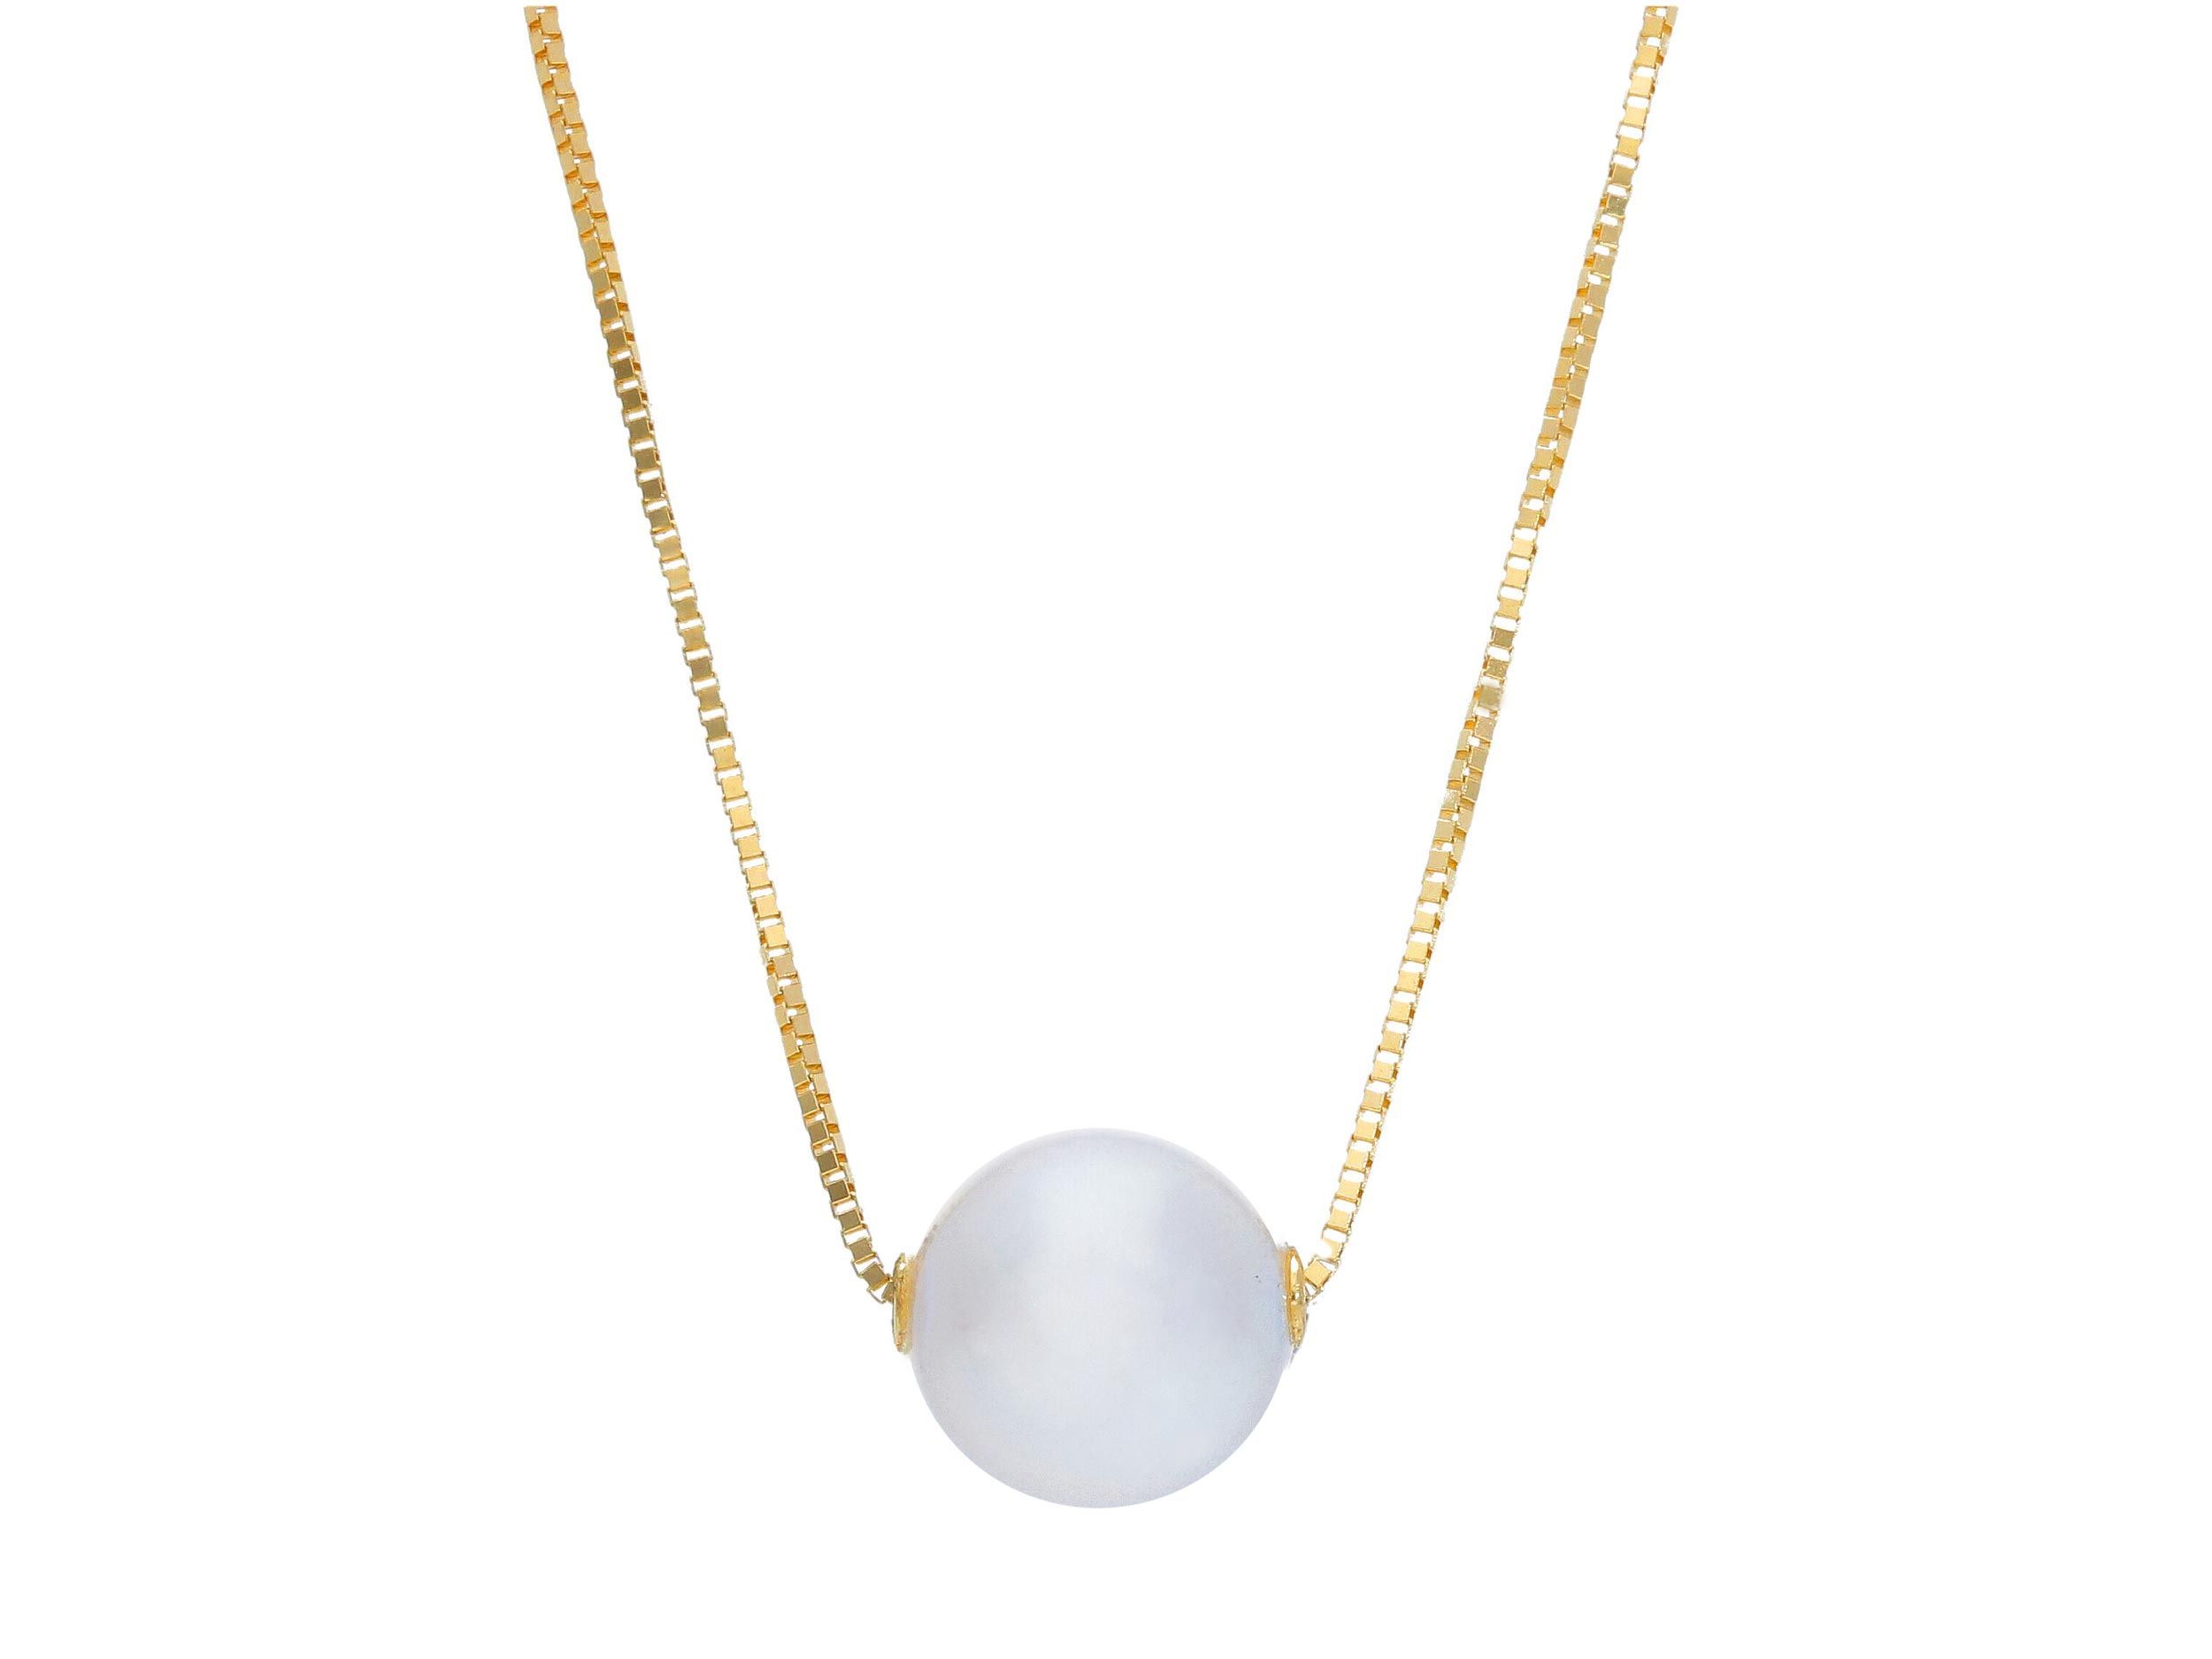 Golden necklace k14 with a pearl Ø 8mm (code S249730)